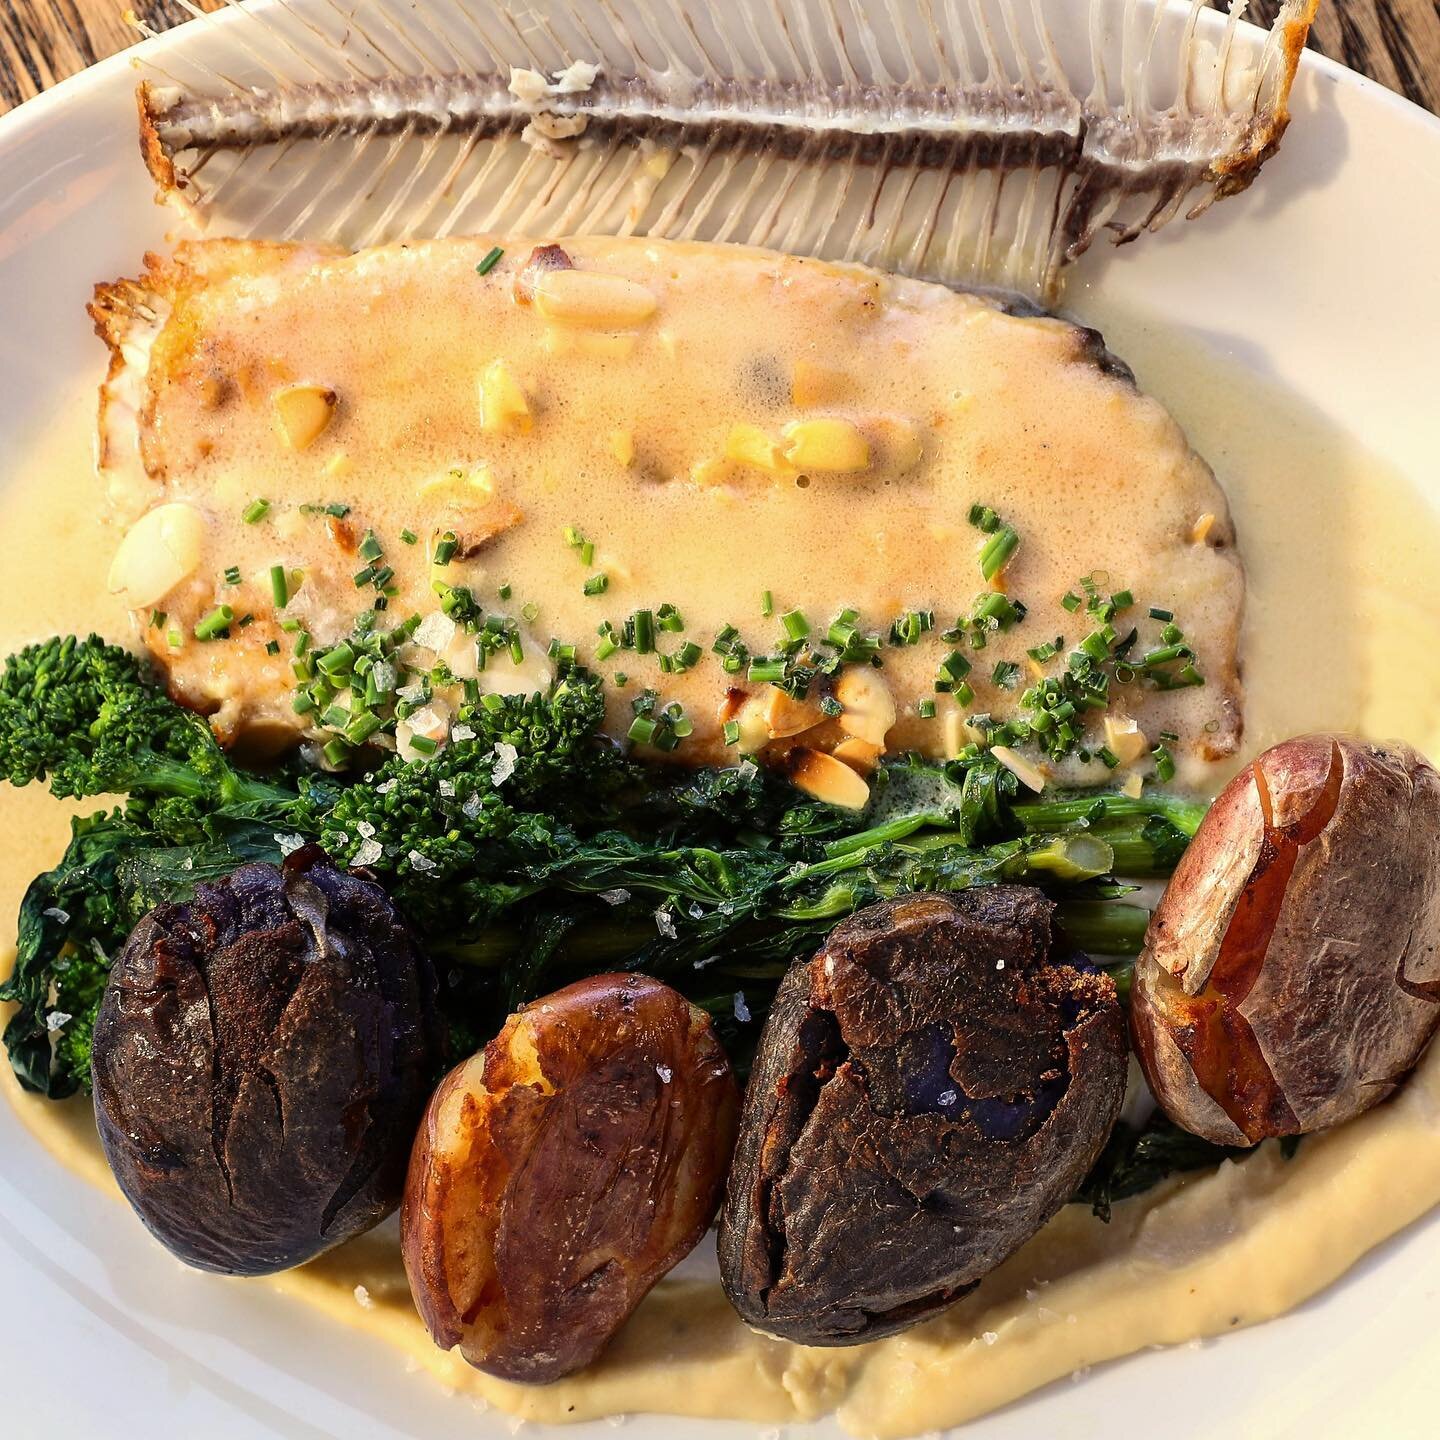 A unique flavor beloved by seafood-lovers and known to convert seafood-haters&hellip; 

📸 Dover Sole Meuniere: almonds, brown butter, parsnip crema, broccolini, fingerlings 

#bostonfoodies #bostonfood #bostoneats #bostonreataurants #boston #backbay